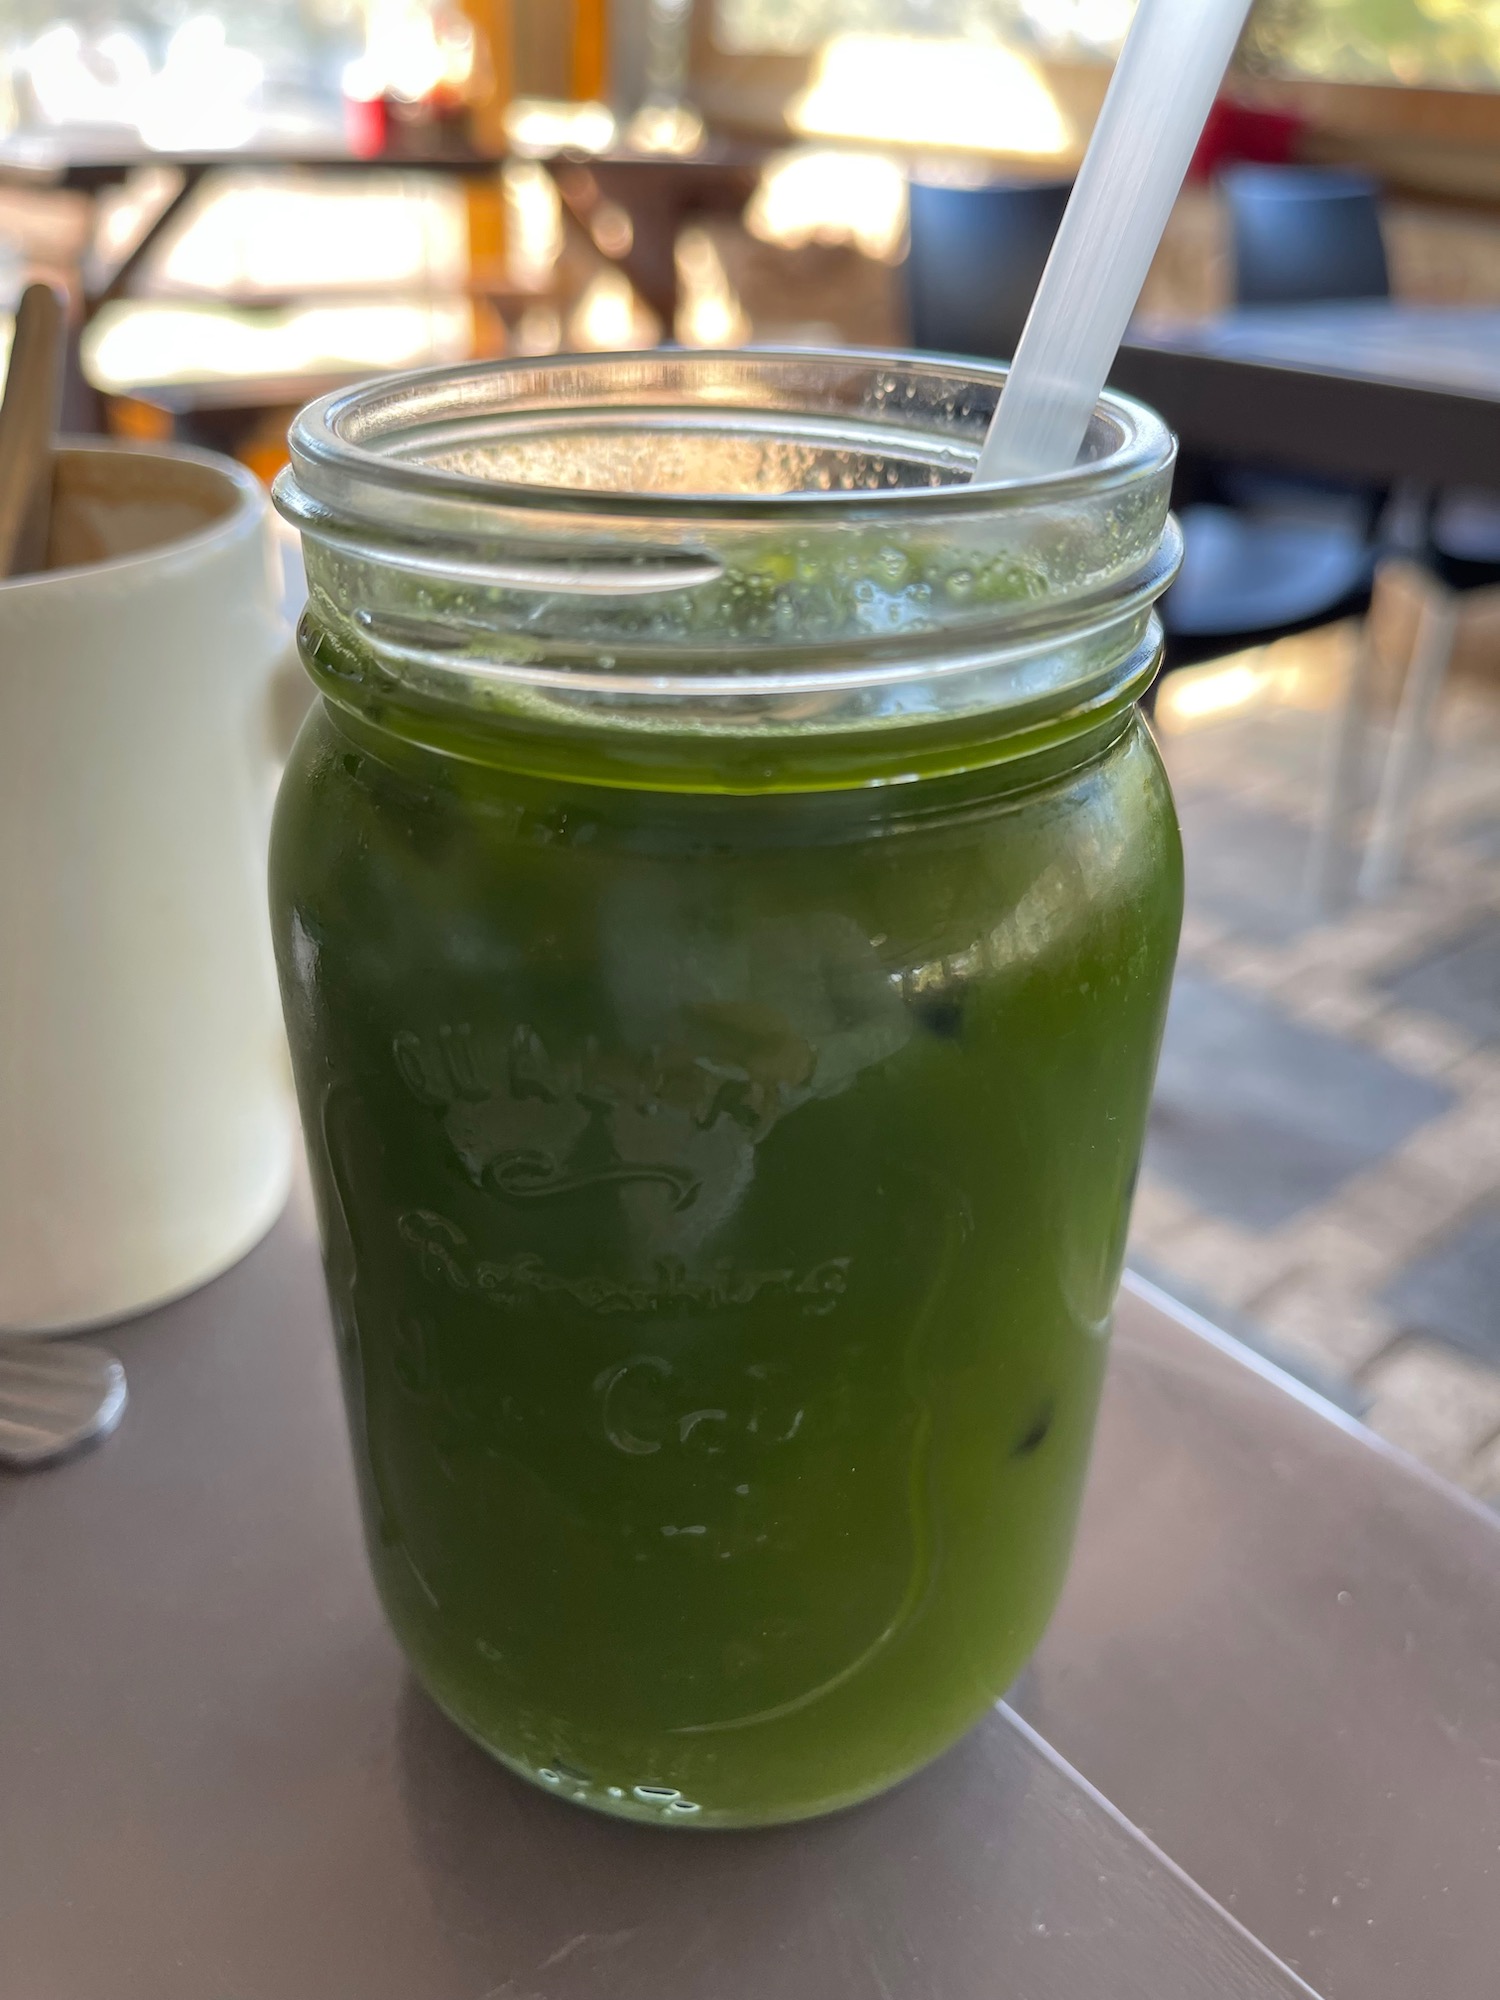 a green drink in a glass jar with a straw